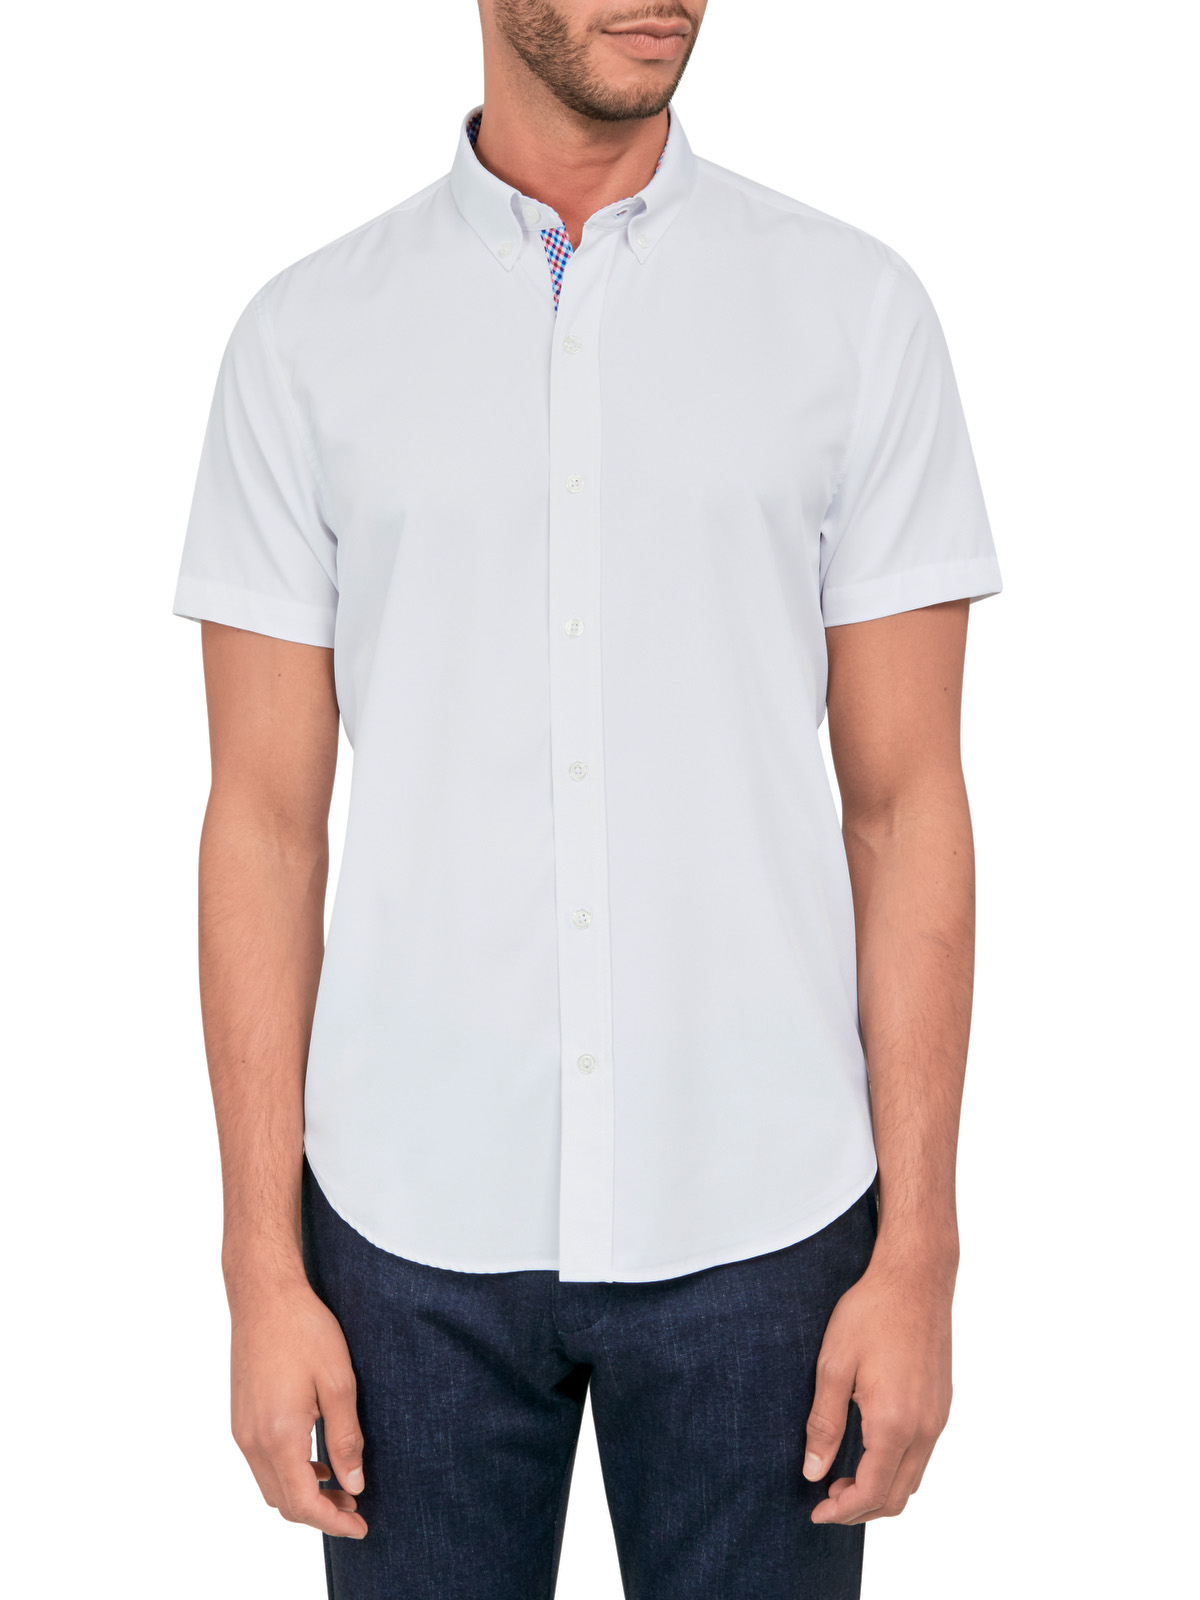 CON.STRUCT SOLID PERFORMANCE SHORT SLEEVE SHIRT